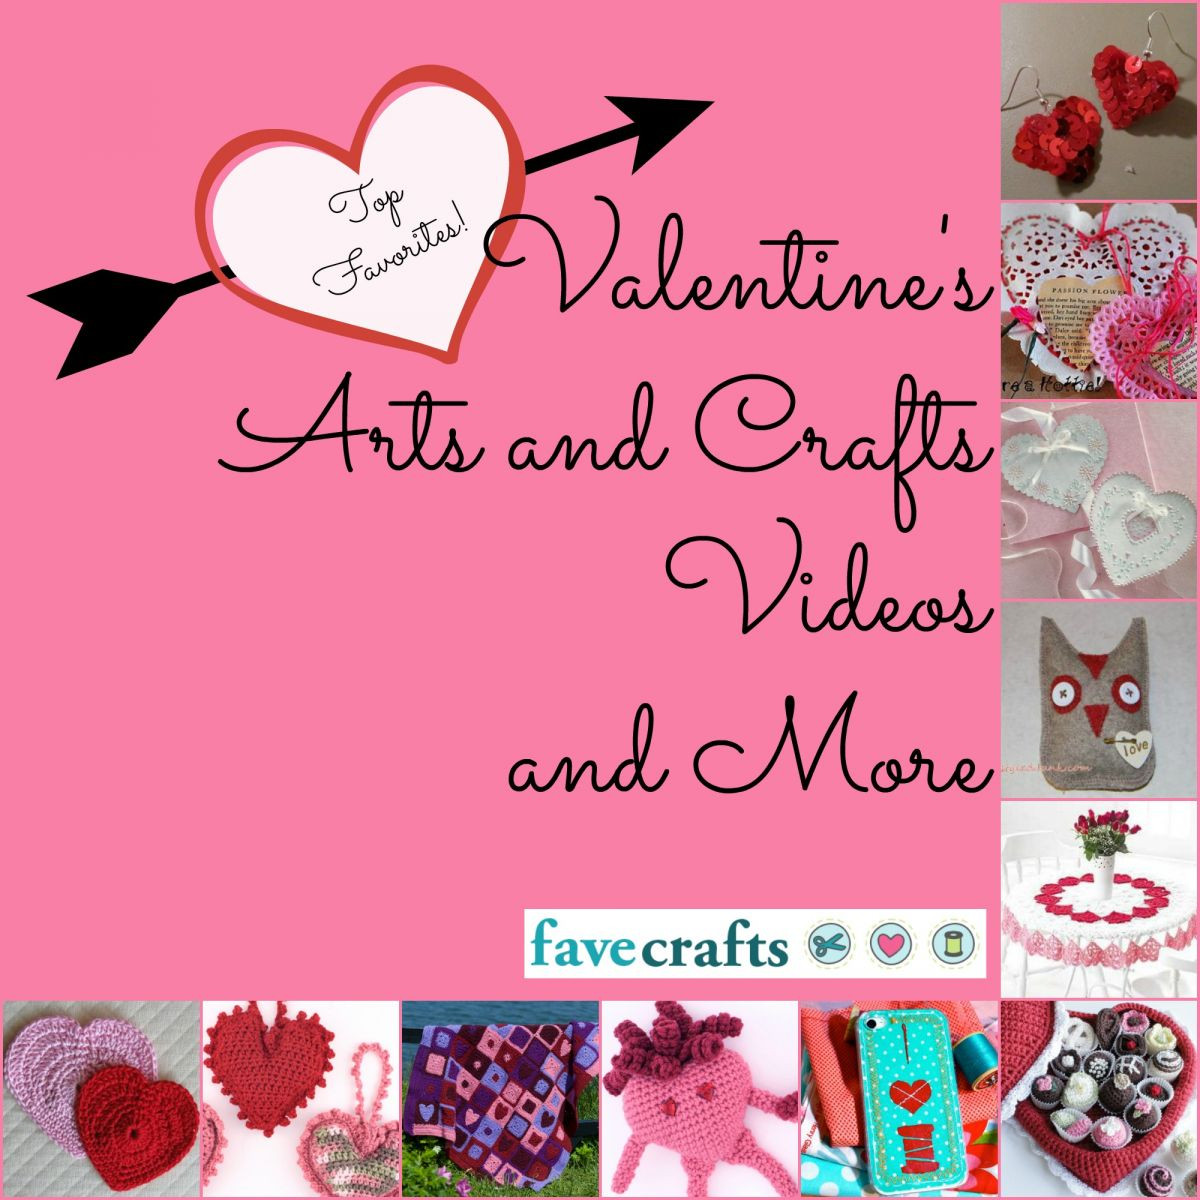 Valentine'S Day Arts And Crafts For Adults
 Top 15 Favorite Valentine s Arts and Crafts Videos and